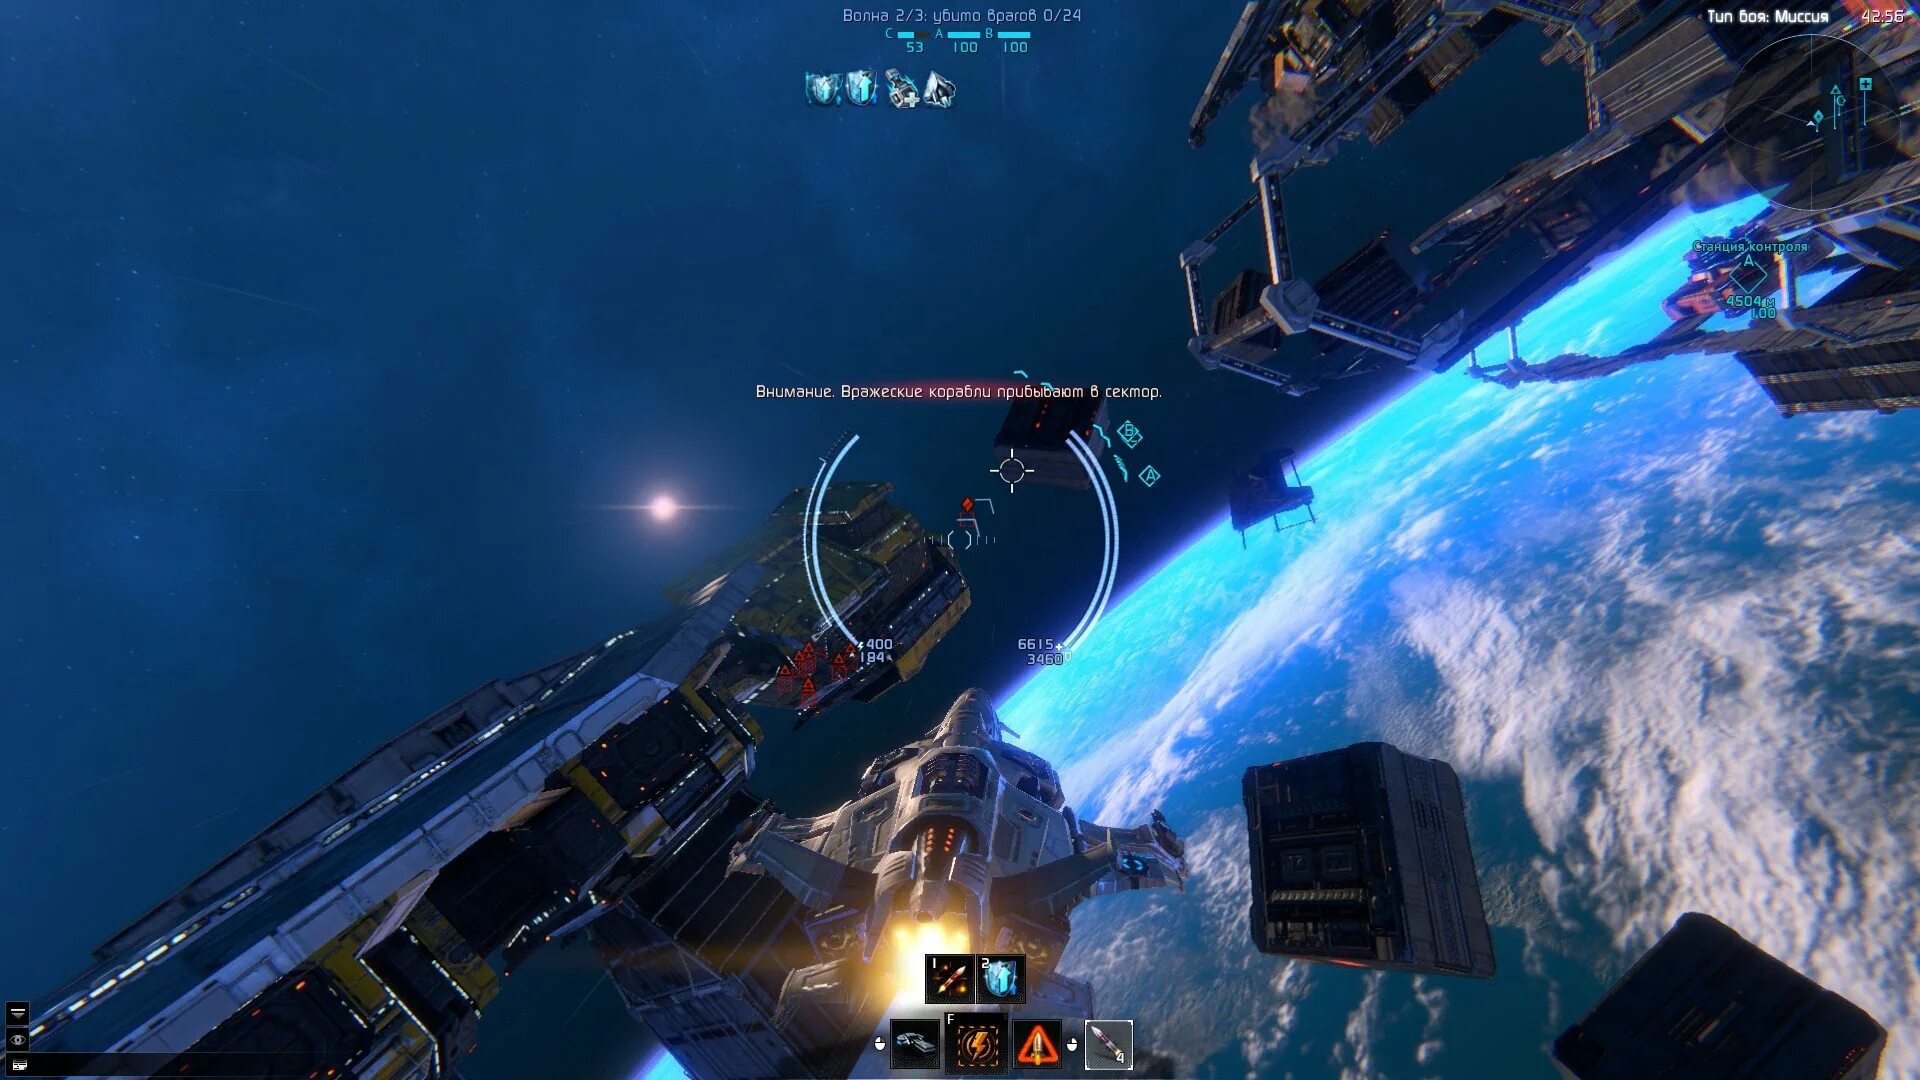 Игра Star Conflict. Star Conflict (2012) PC. Star Conflict (2014). Star Conflict 2013.